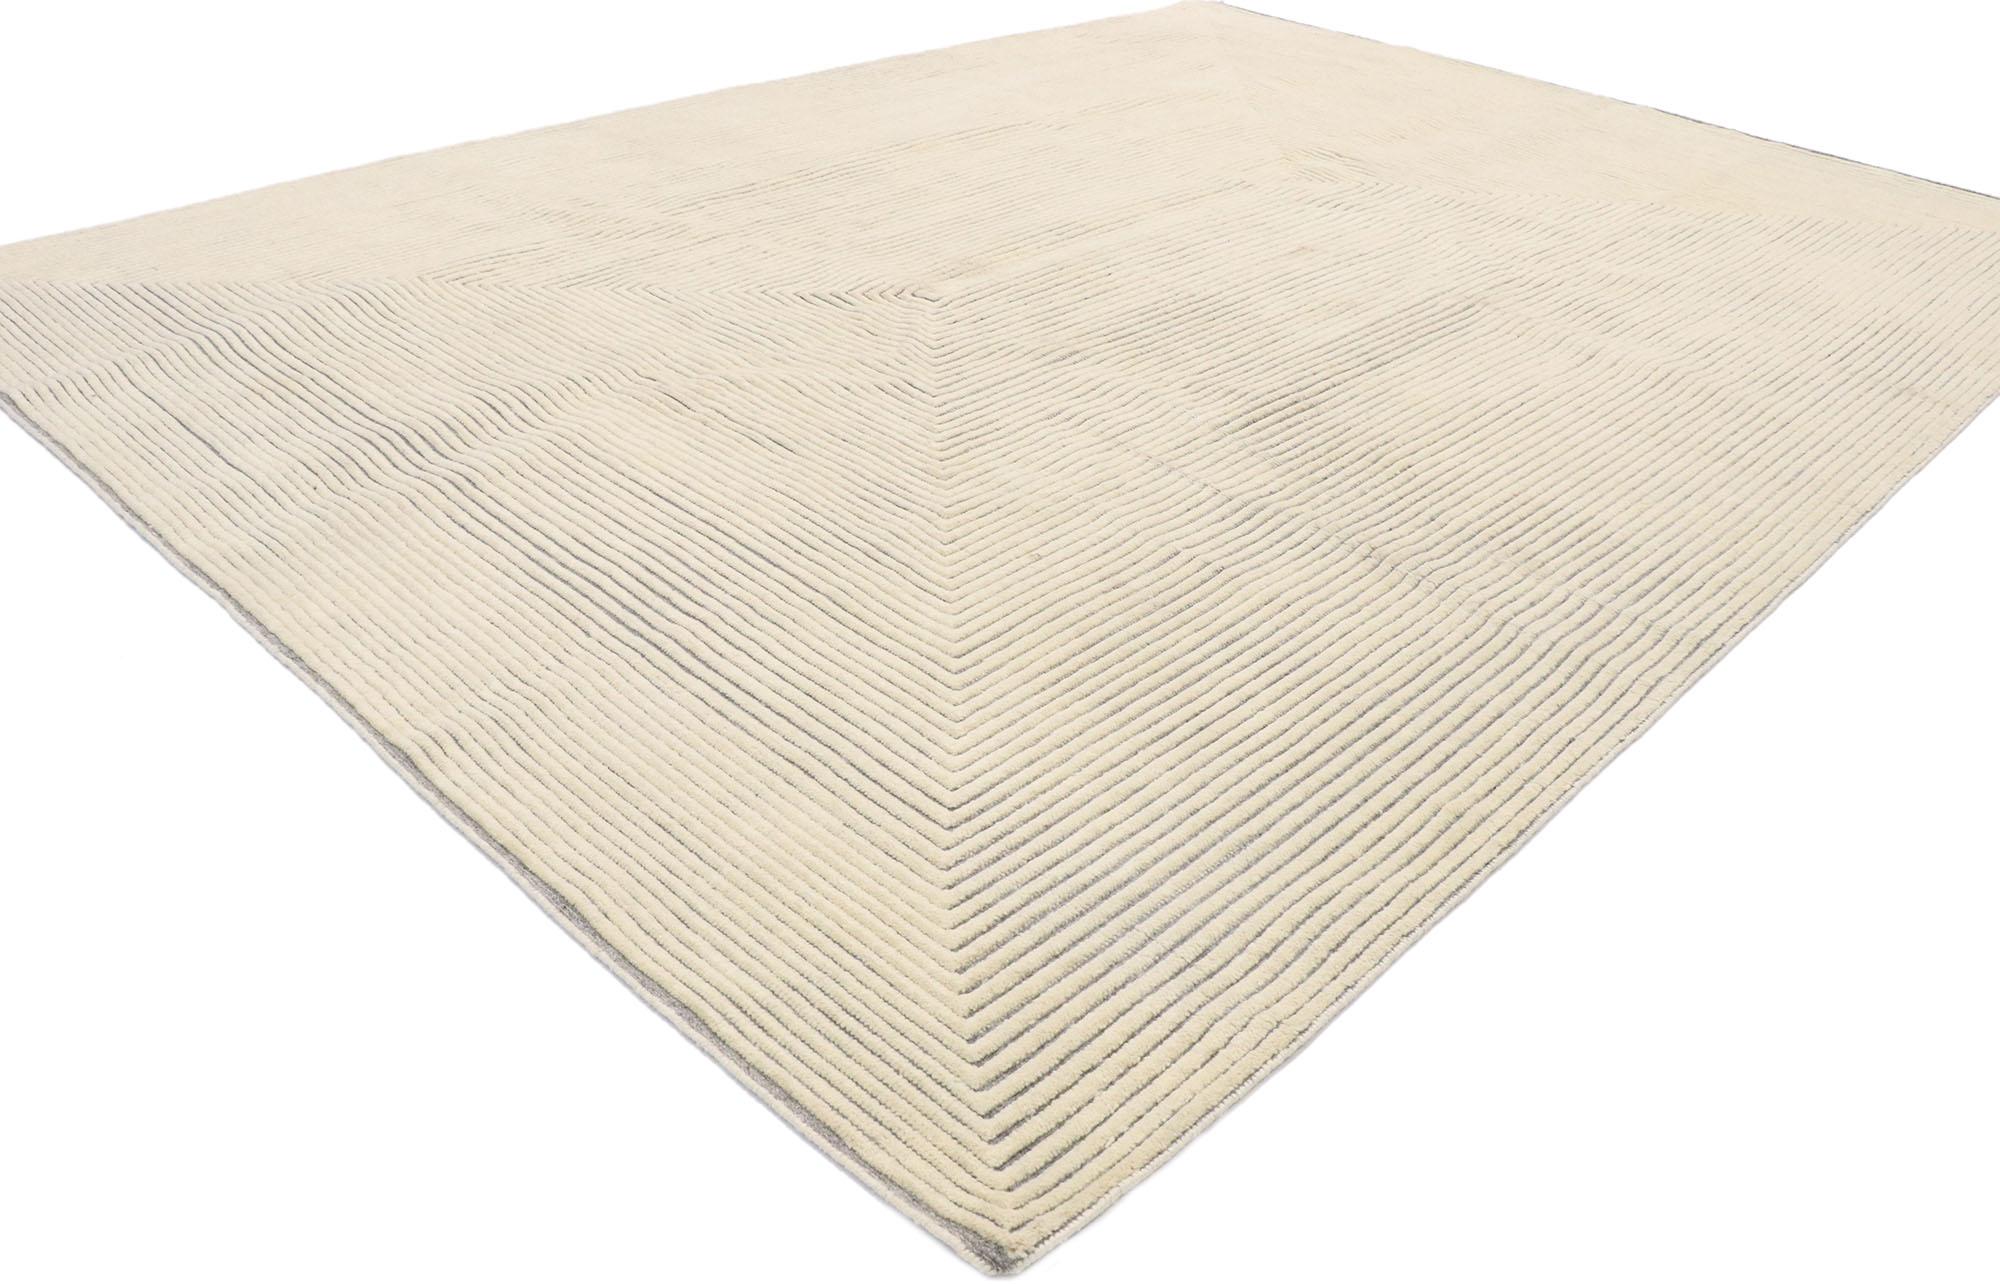 30613 new contemporary Moroccan style Souf rug with Raised Minimalist Concentric design. This hand knotted wool new contemporary Moroccan style souf rug features a rectilinear pattern composed of concentric rectangles creating an Expansion effect.